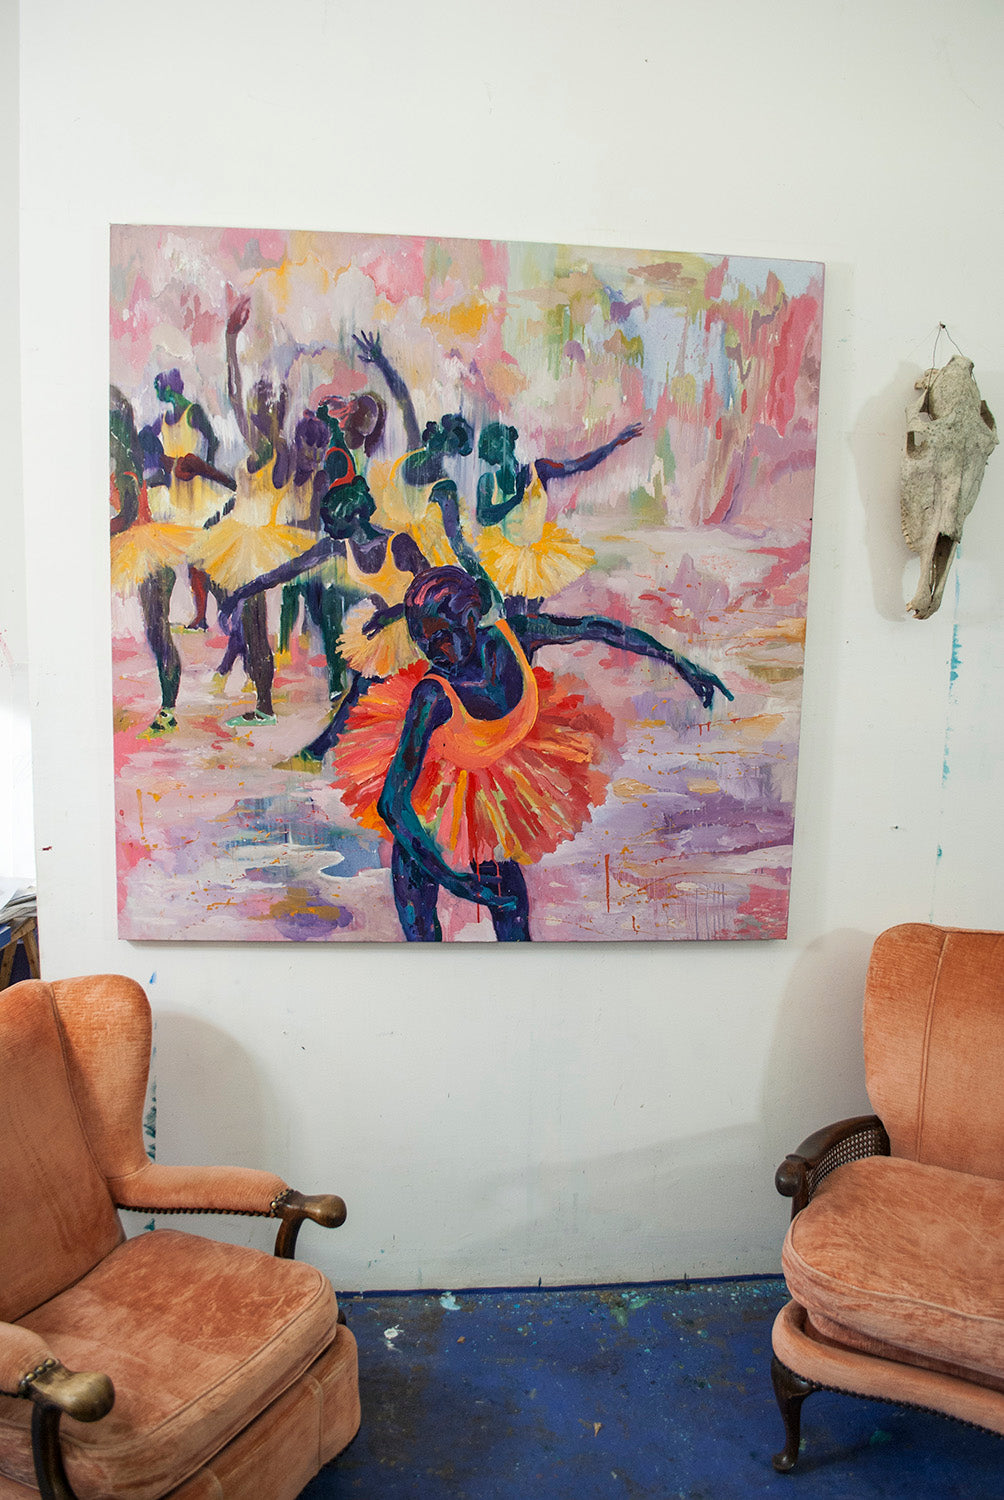 View in a room of Dancers of Tenderness, 150x150cm, oil on canvas painting, 2021 by Dominic Virtosu